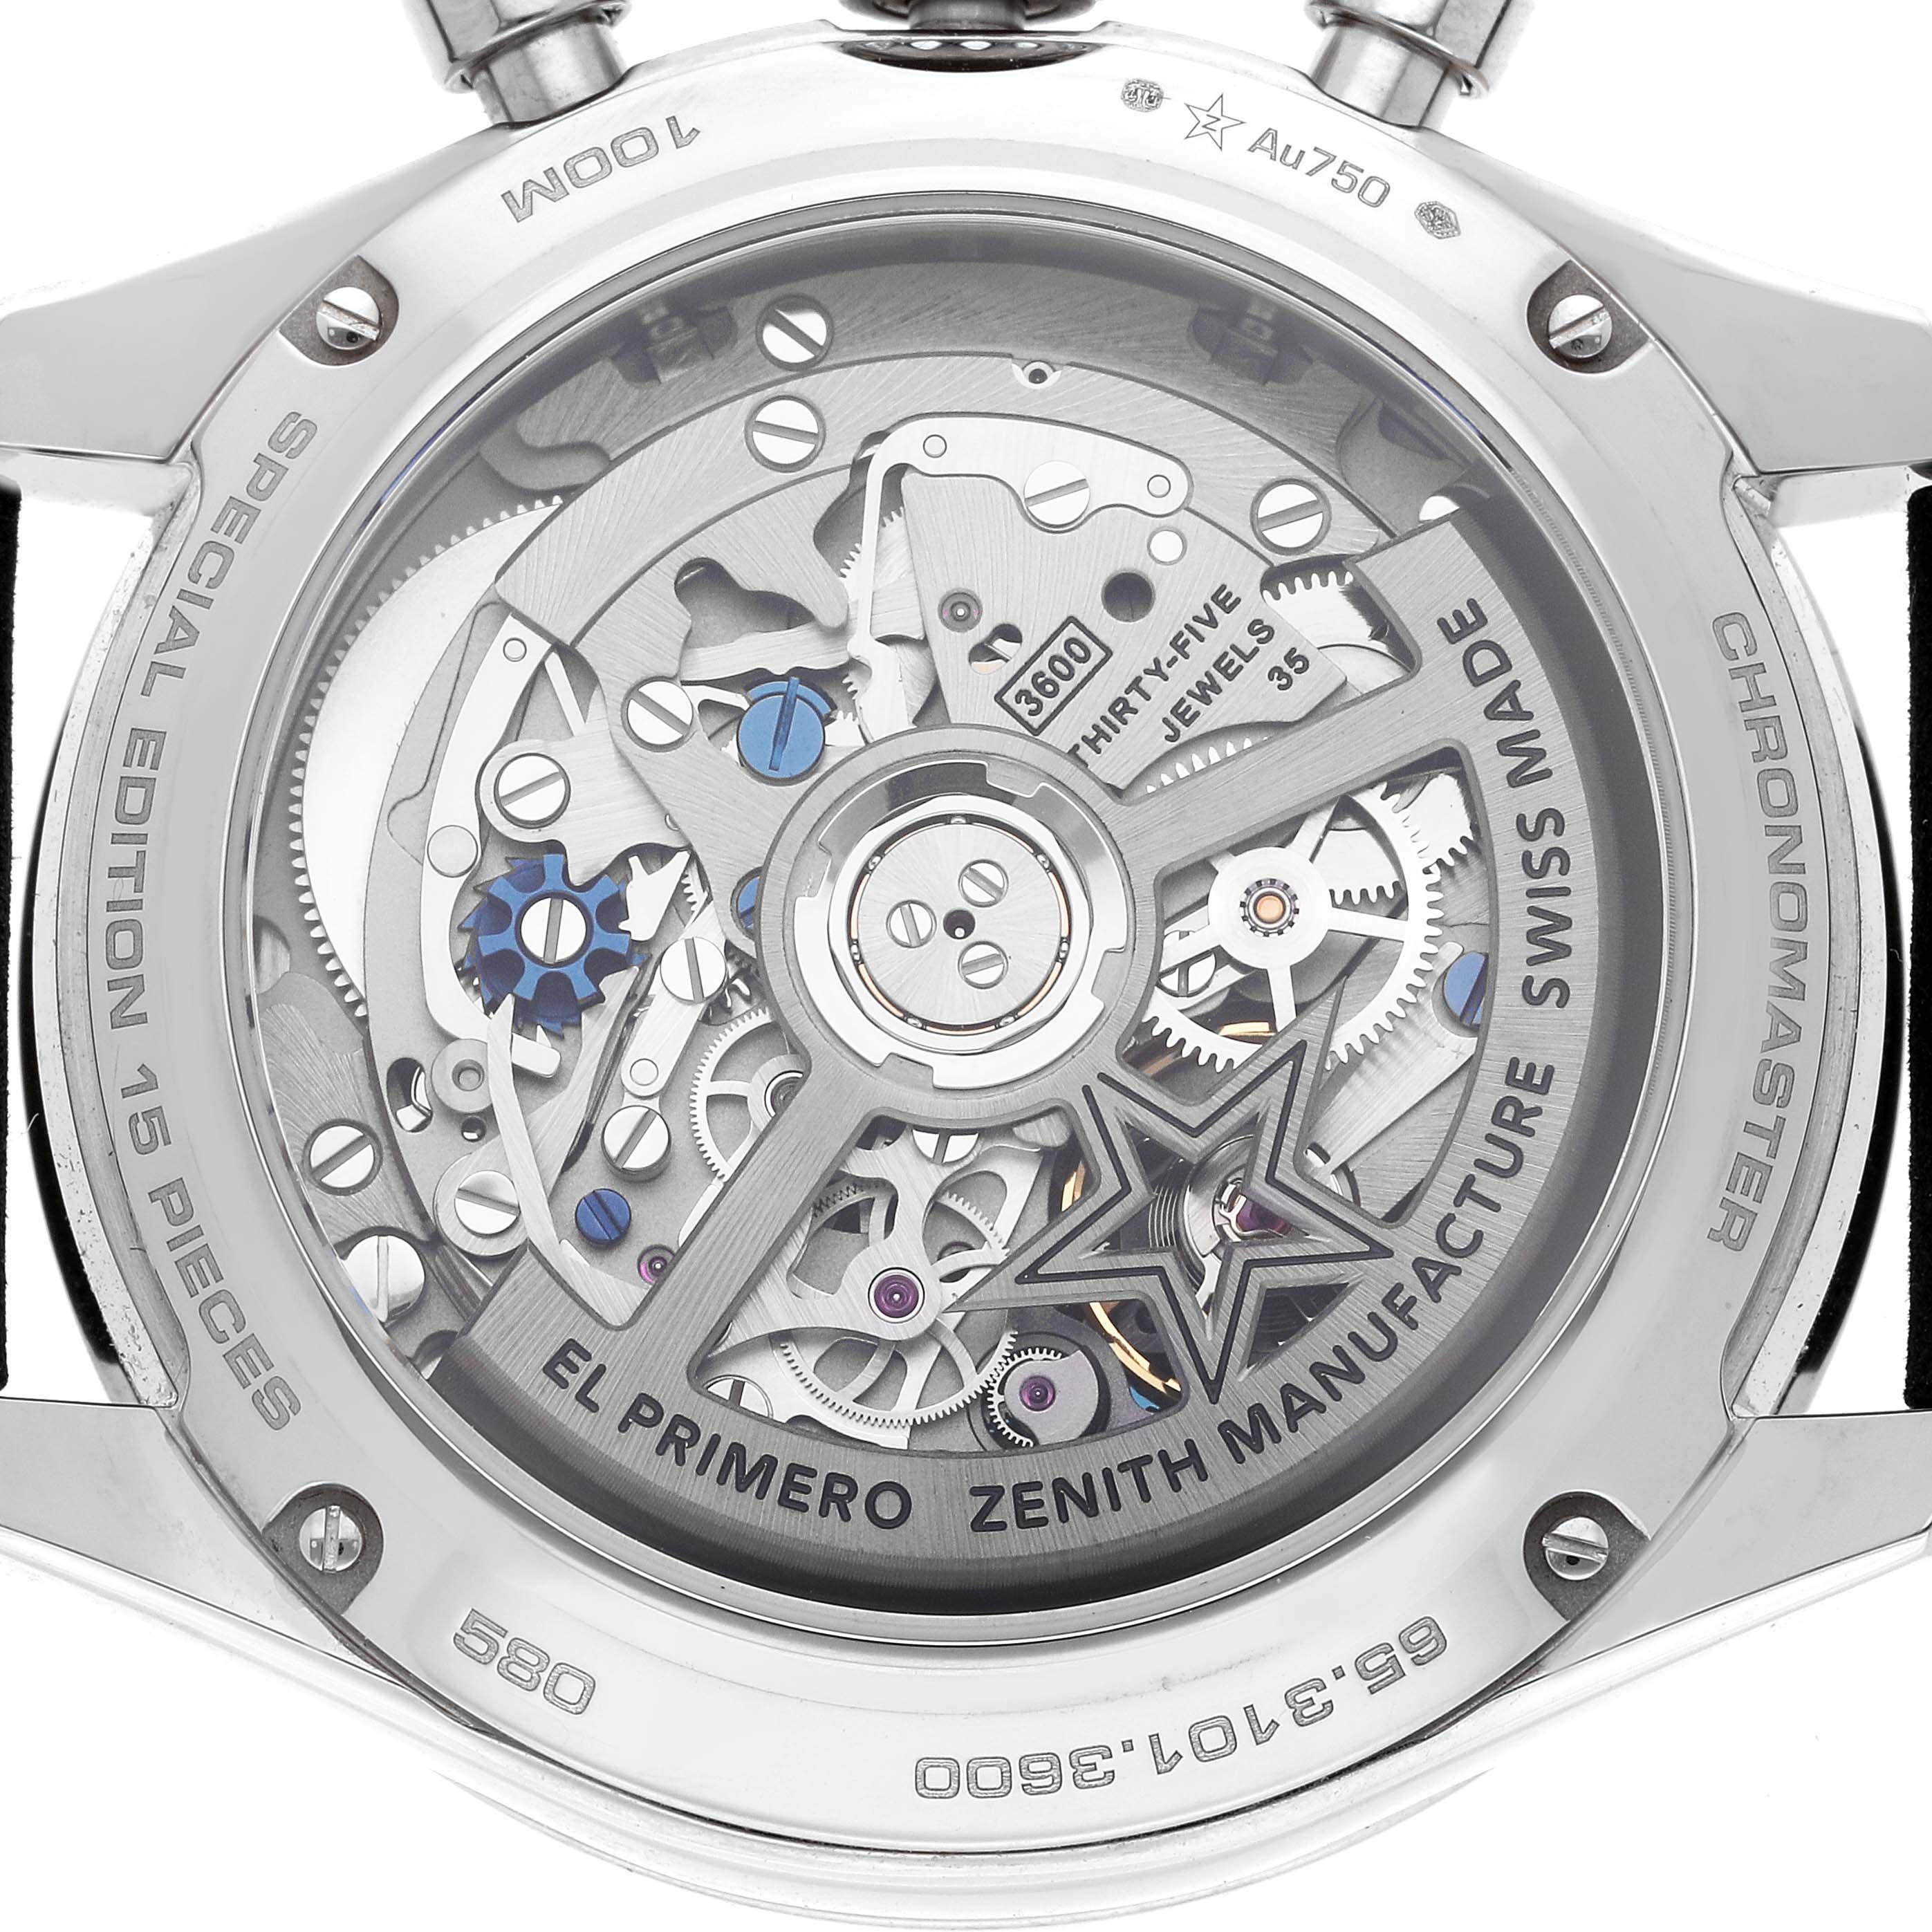 Zenith Chronomaster Sport Limited Edition White Gold Watch 65.3101.3600 Box Card For Sale 6